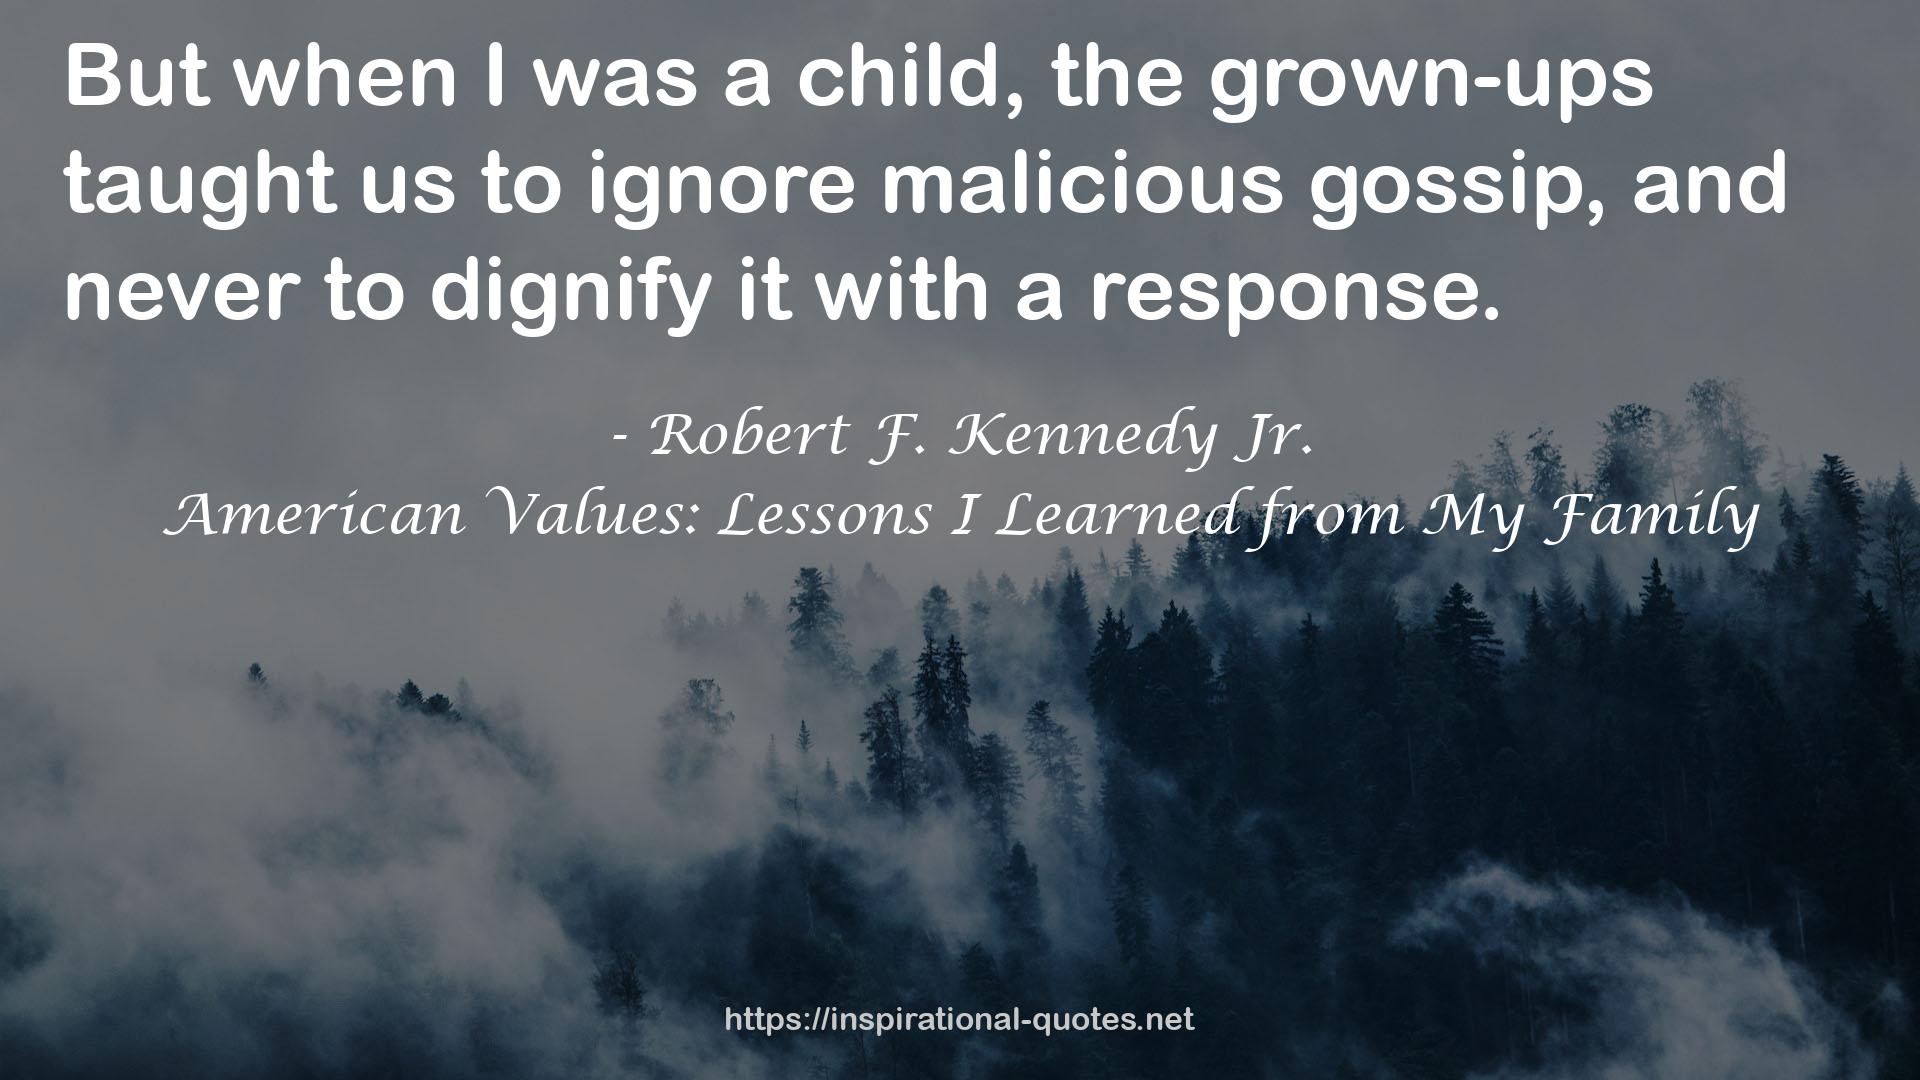 American Values: Lessons I Learned from My Family QUOTES